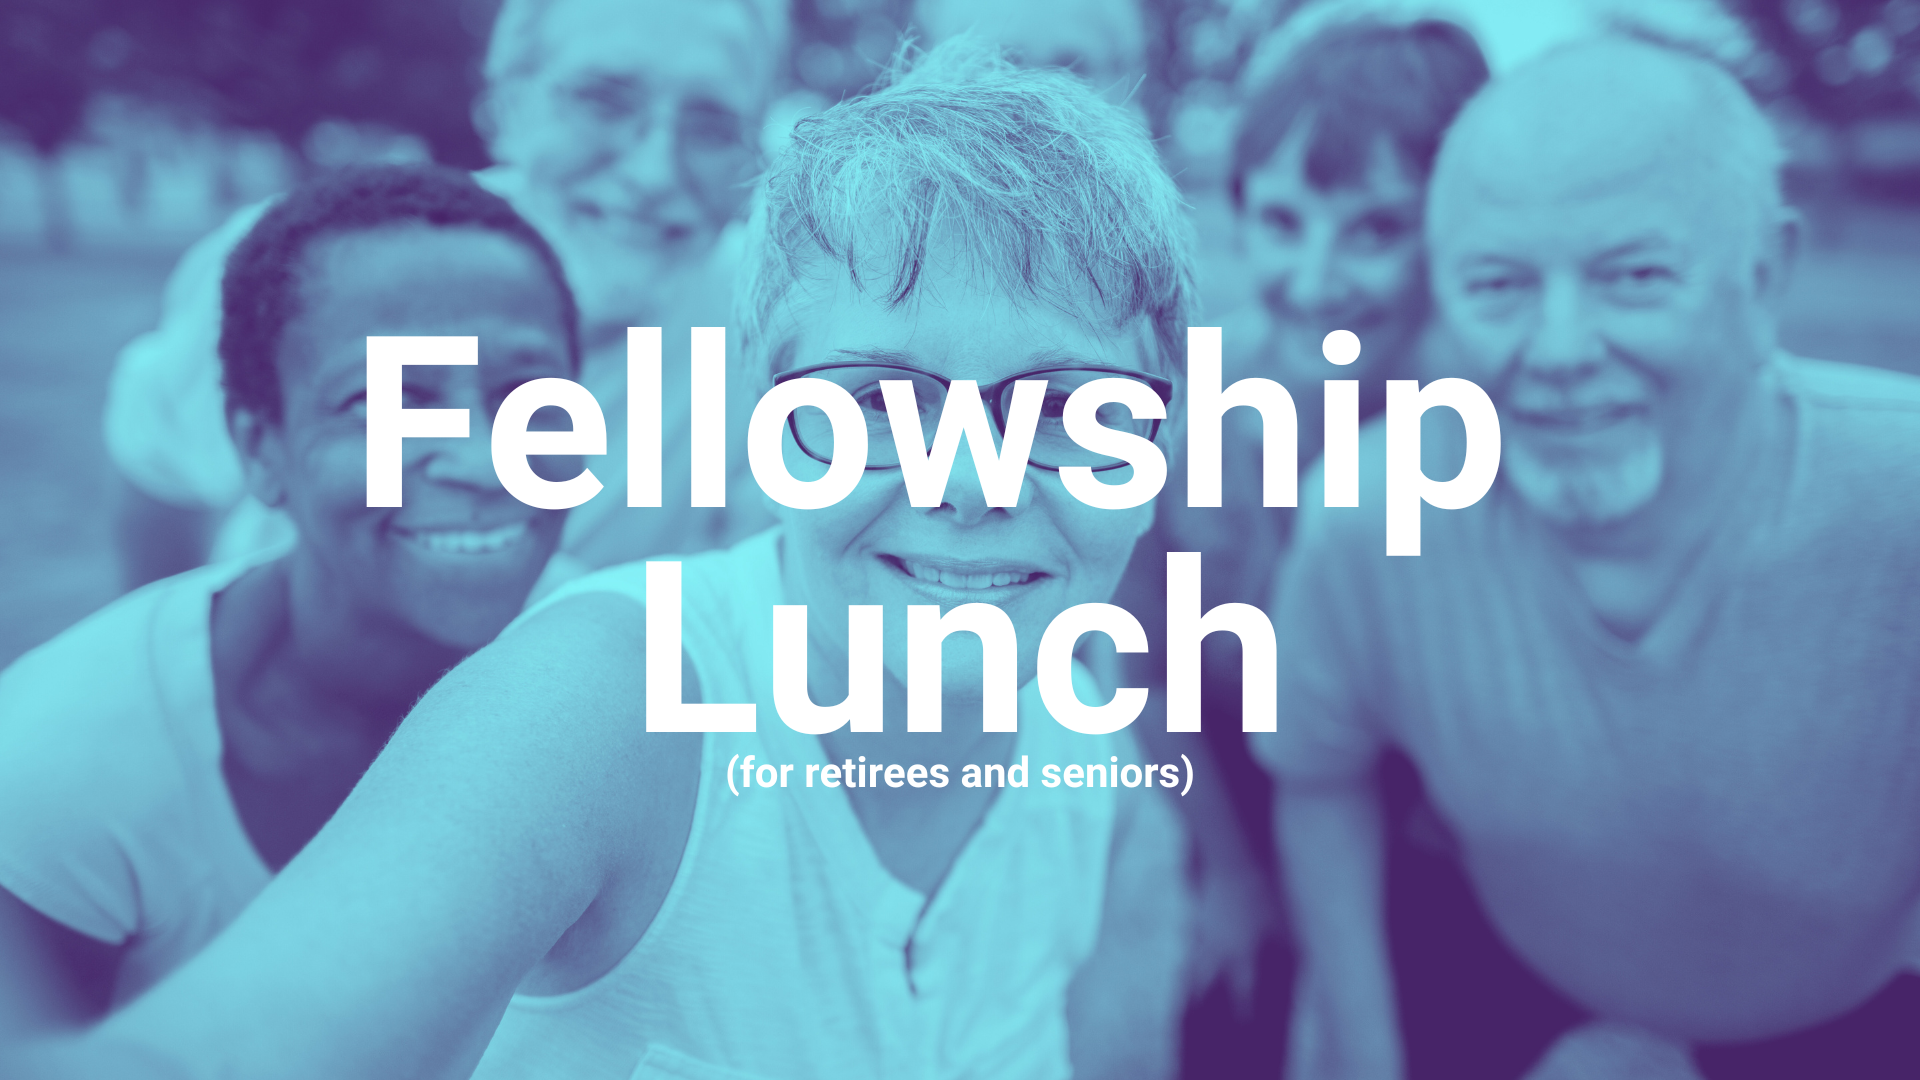 Fellowship Lunch (for retirees and seniors)